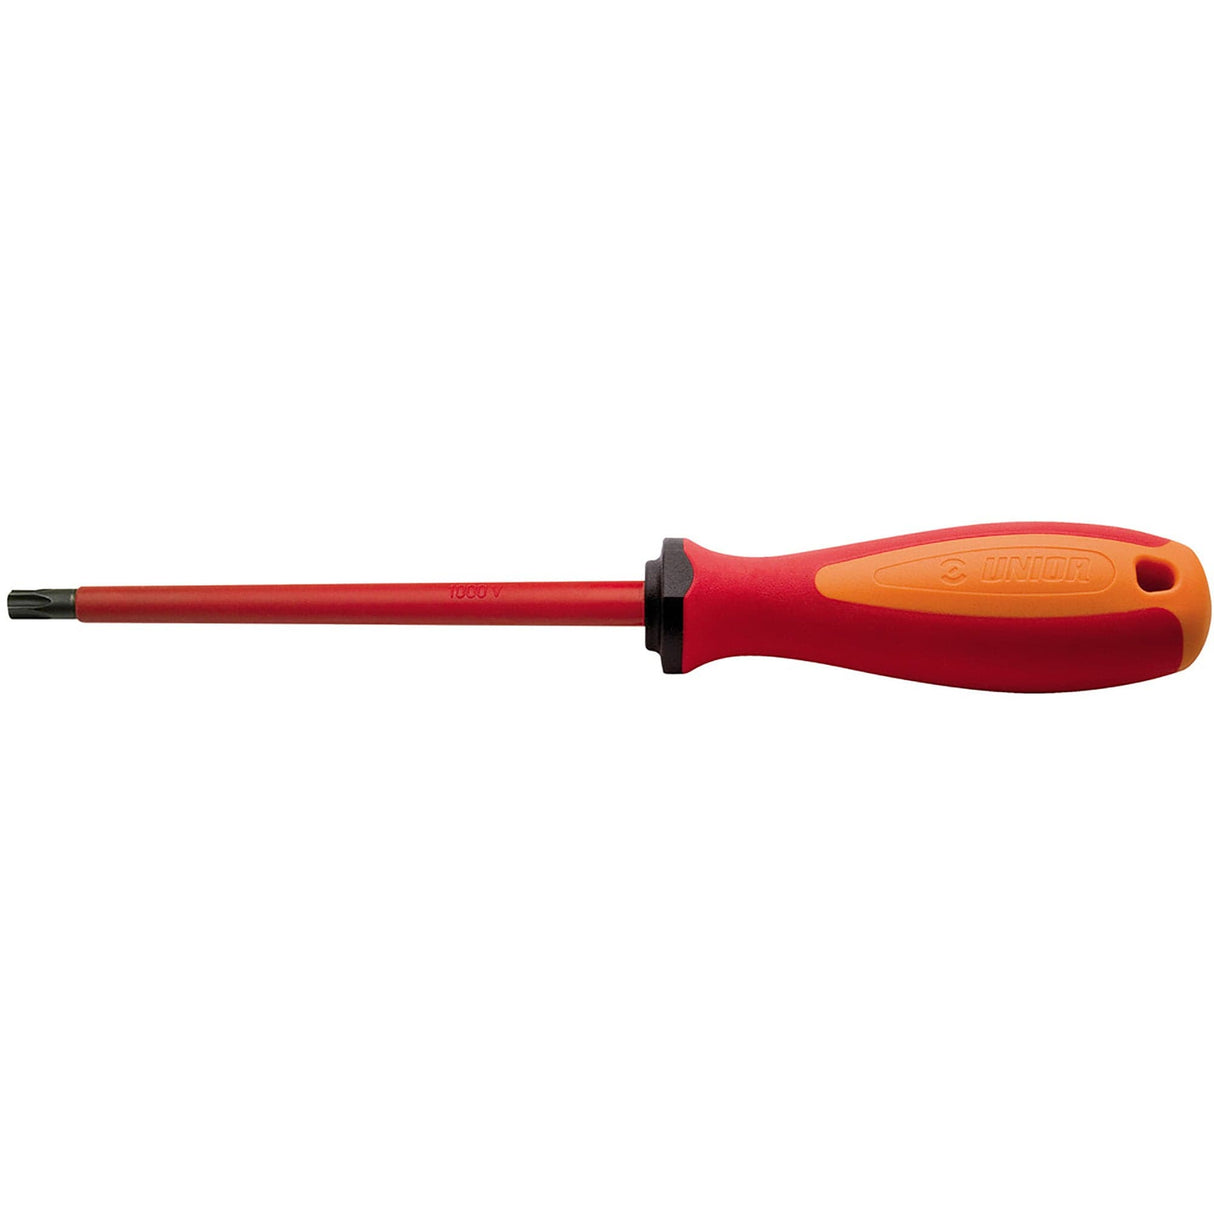 Unior Screwdriver Vde Tbi With Tx Profile: Red Tx 25